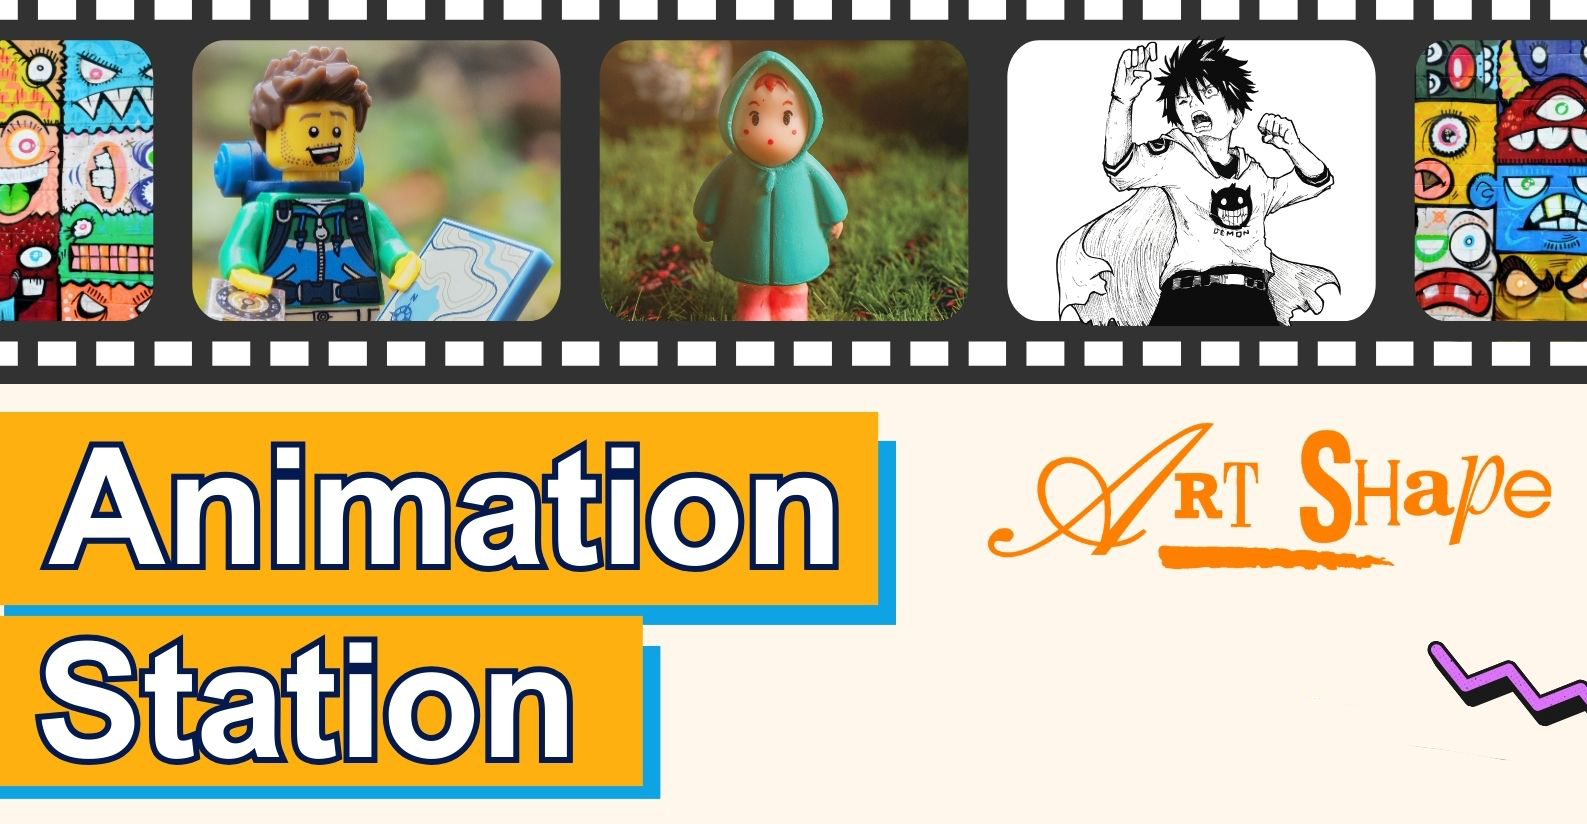 Bright colourful banner advertising Animation Station with a reel of images including a lego figure, a clay person in a green coat, and a manga style boy in a cape